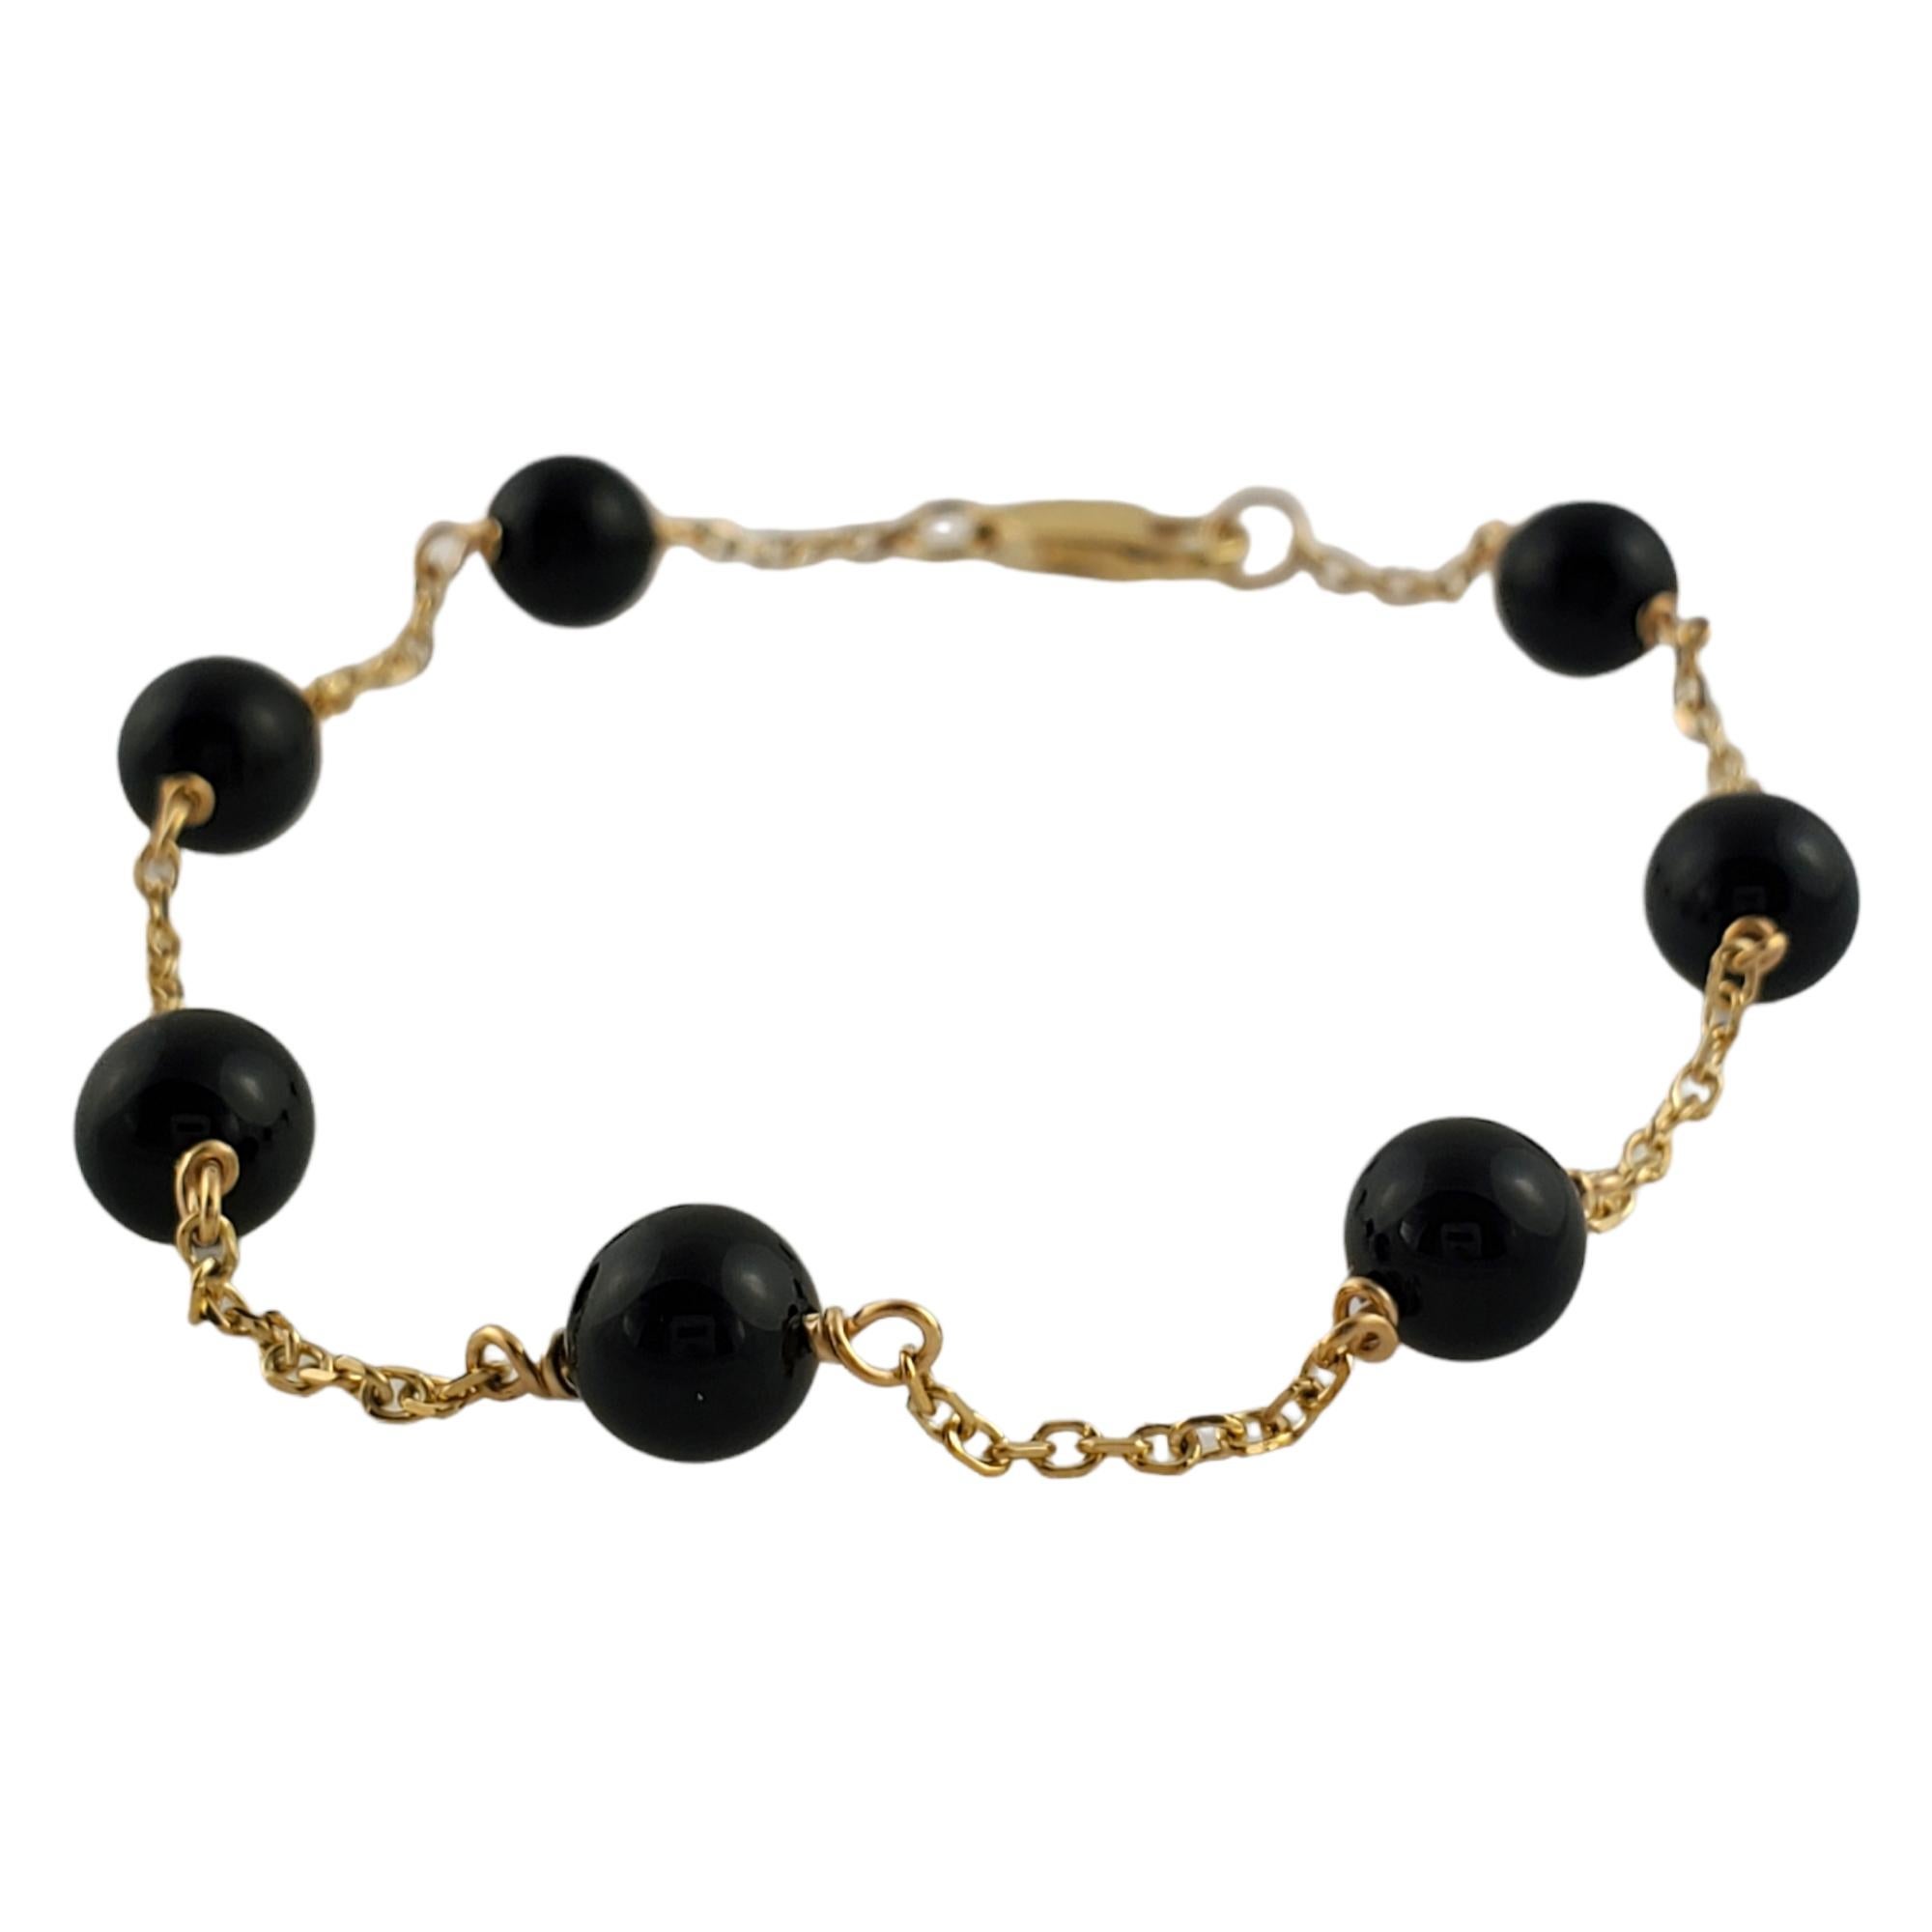 Vintage 14K Yellow Gold black Bead Bracelet

Beautiful gold chain bracelet with black bead detailing!

7 round black beads

Size: 7 inches with tape measure, 6.5 inches on bracelet cone closed

Weight: 3.4 g/ 2.1 dwt

Hallmark: 14K

Very good